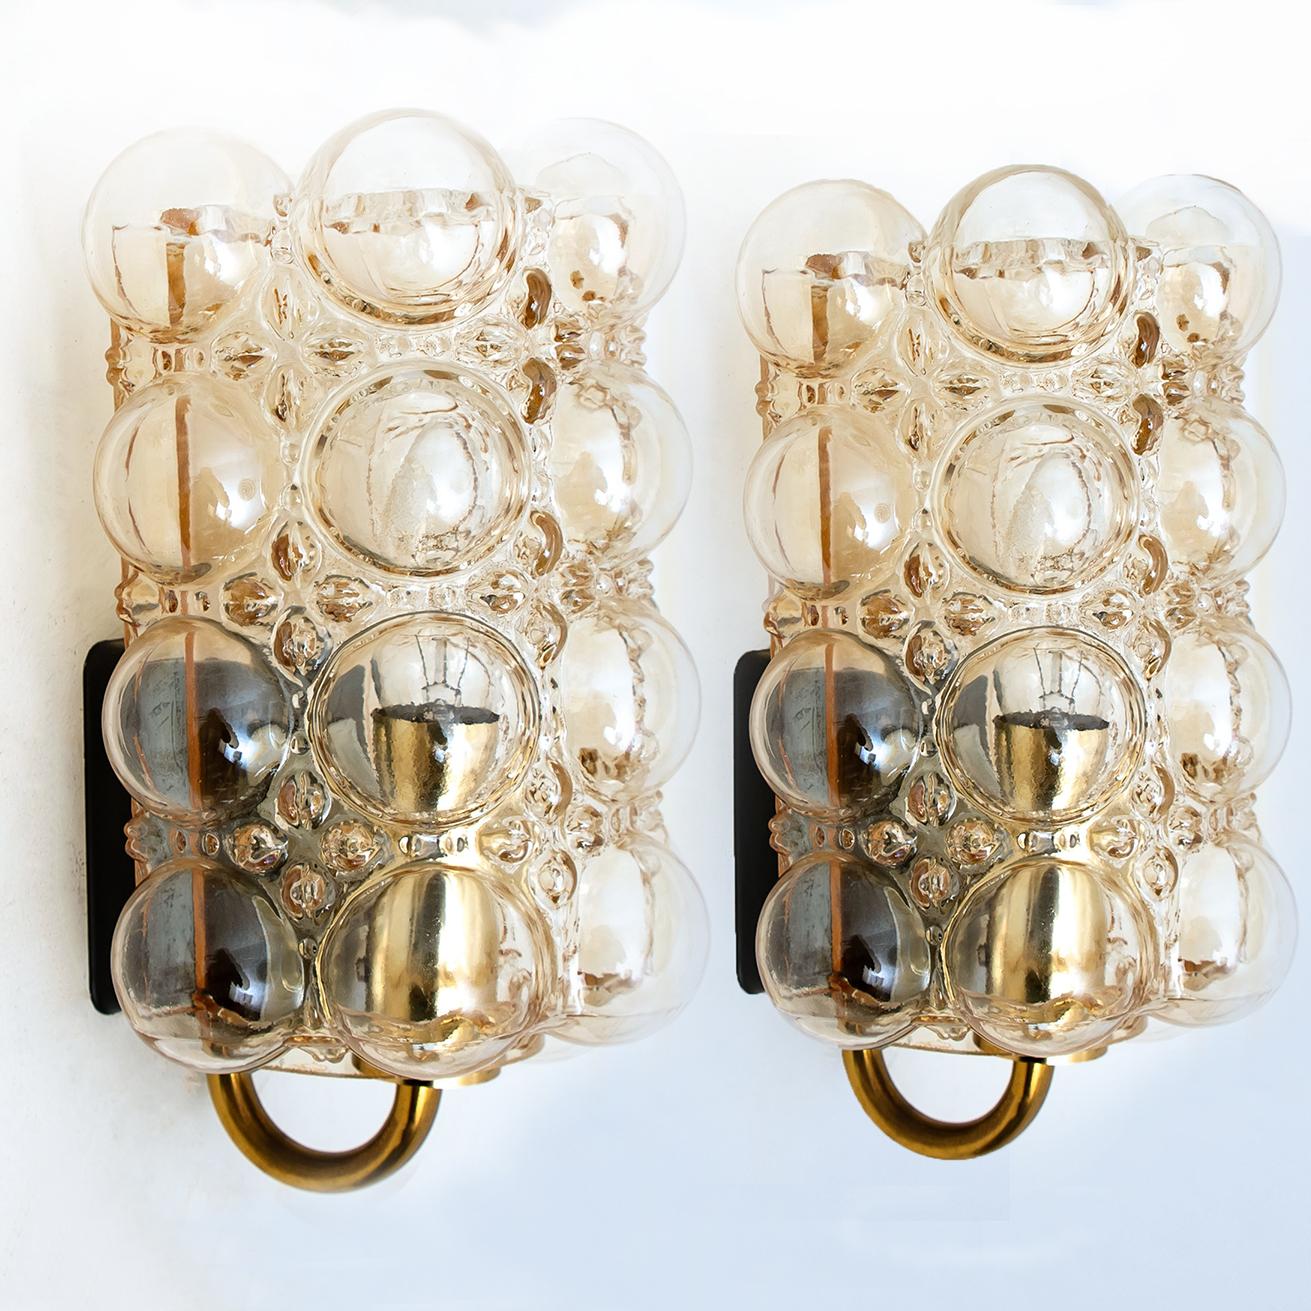 A pair of beautiful bubble glass wall lights designed by Helena Tynell for Glashütte Limburg. A design Classic, the amber colored or toned of the hand blown glass gives a wonderful and warm glow. 

Heavy quality and in excellent vintage condition.